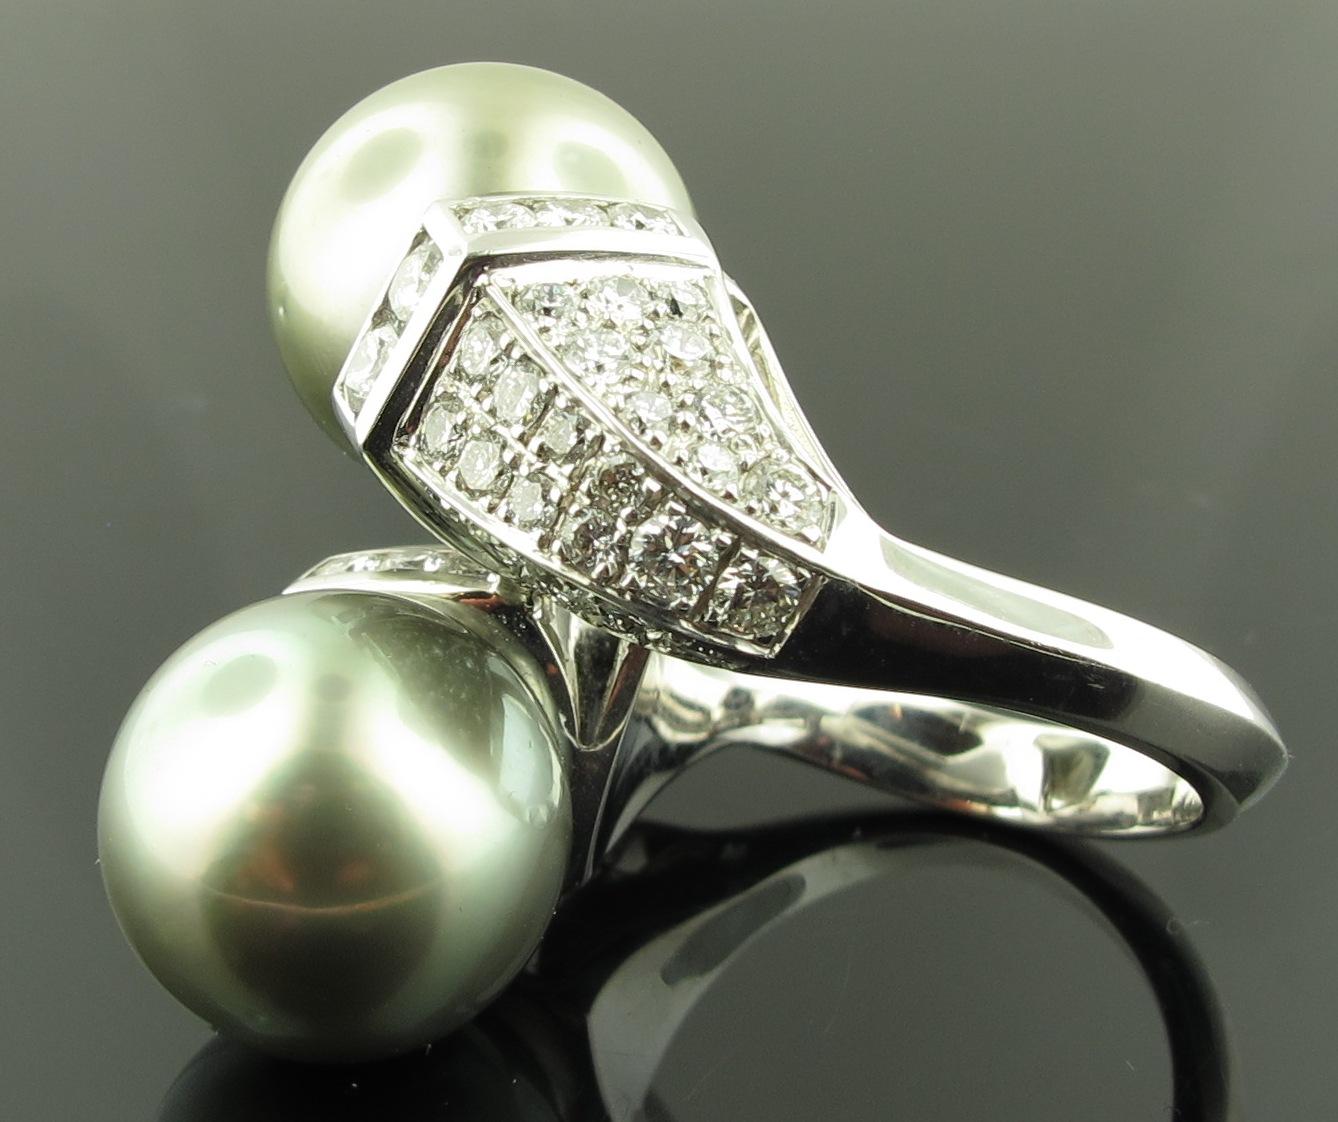 2 matching Tahitian pearls, 14 mm each, set in 18 karat white gold in a cross over setting, with 3.75 carats of round brilliant cut diamonds. F-G in color, VS in clarity.  Ring size 7.5.